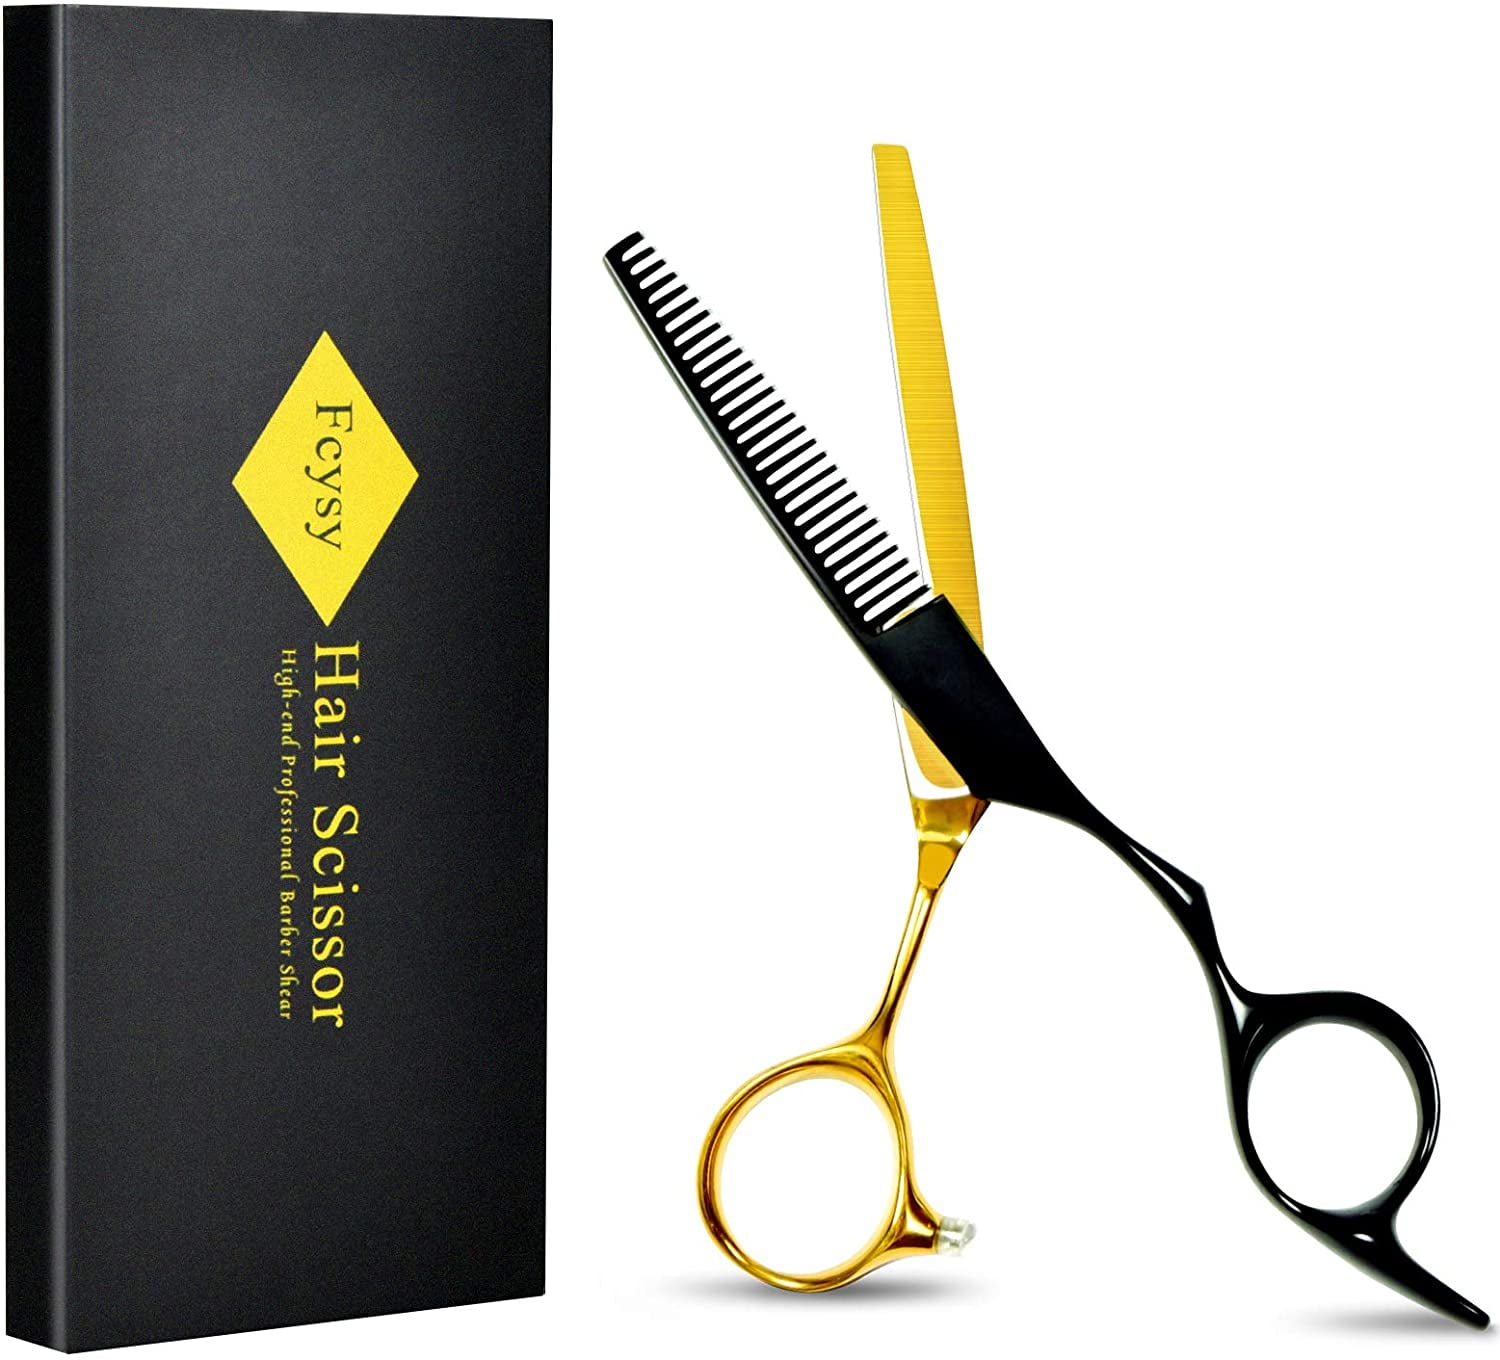 NTS Solingen Shiny-Line 205 5.5 Thinning Shears Scissors | 39 V-Shaped  Teeth | INOX Rostfrei Stainless Steel | Made in Solingen Germany ¡NO  RETURN